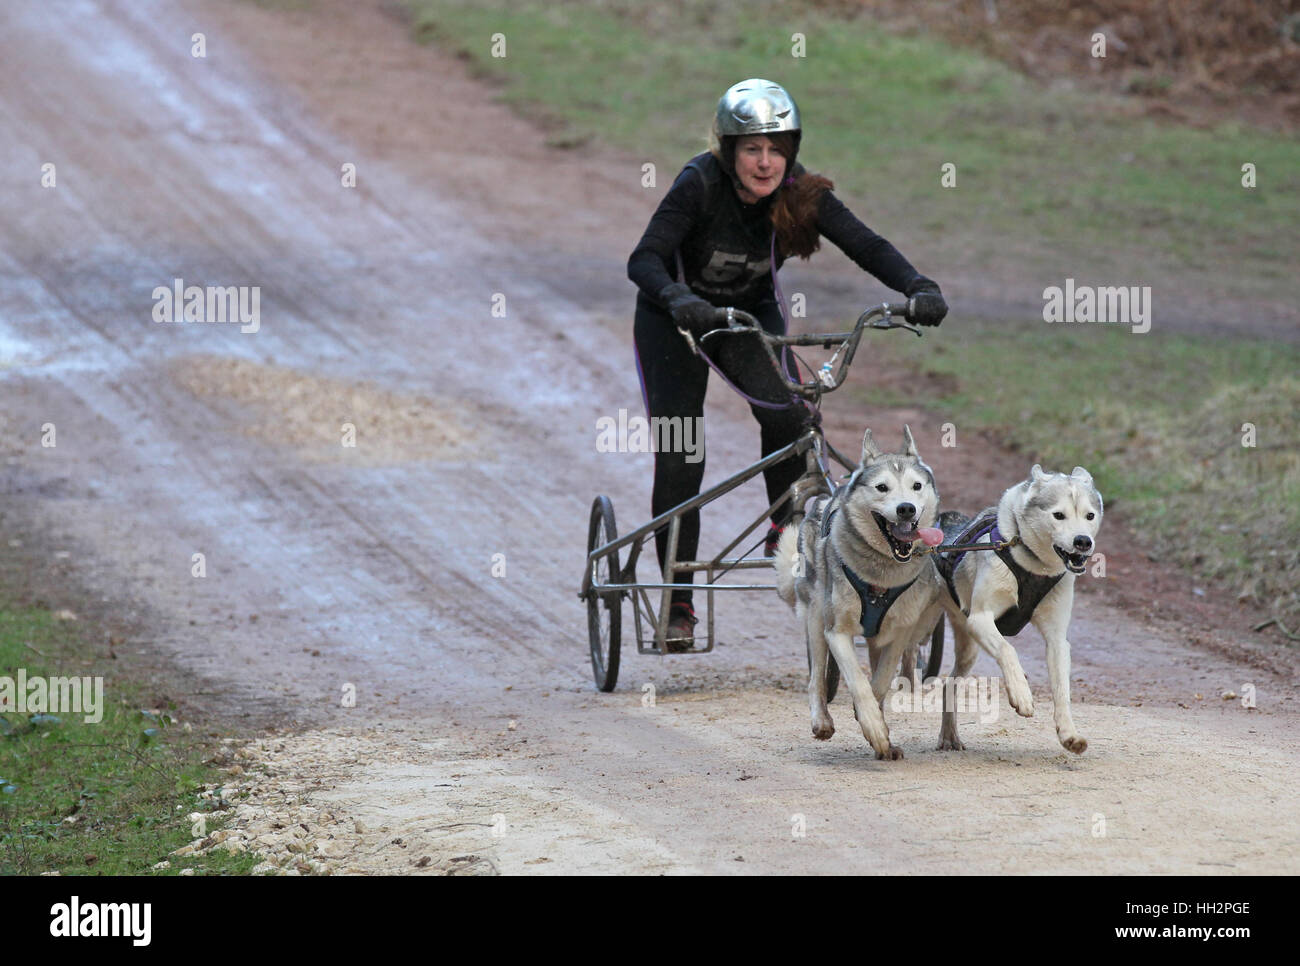 Husky racing at Sherwood Pines forest Nottinghamshire Stock Photo